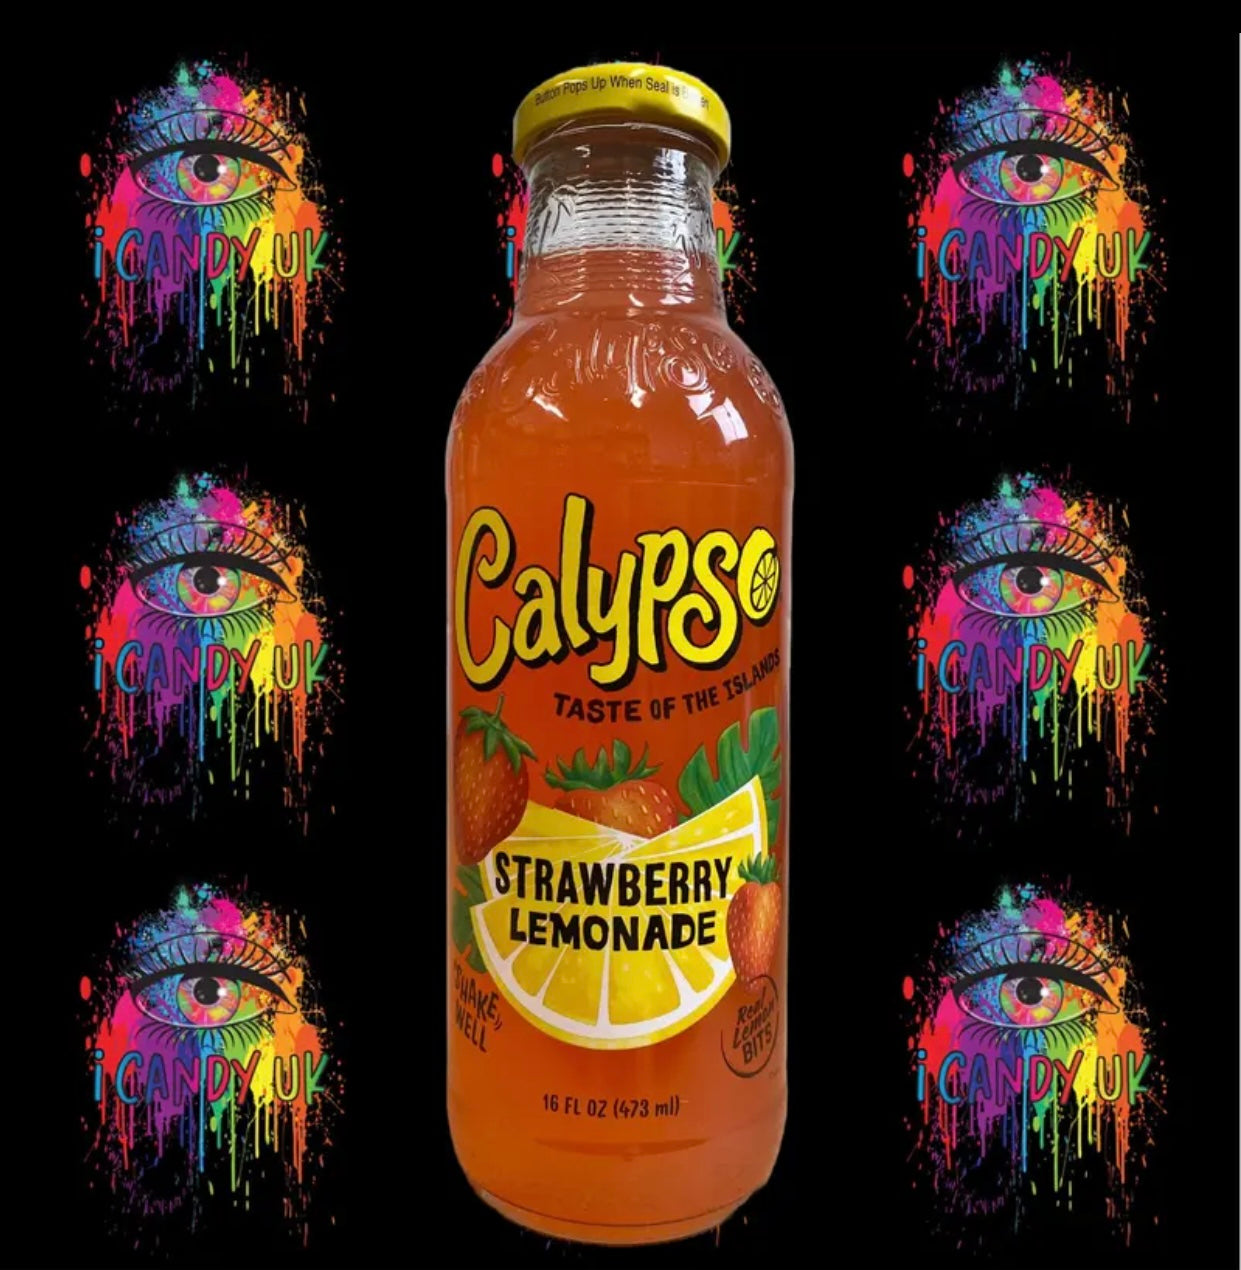 REDUCED TO CLEAR / EXPIRED 11/23 Calypso Strawberry Lemonade Bottles 473ml